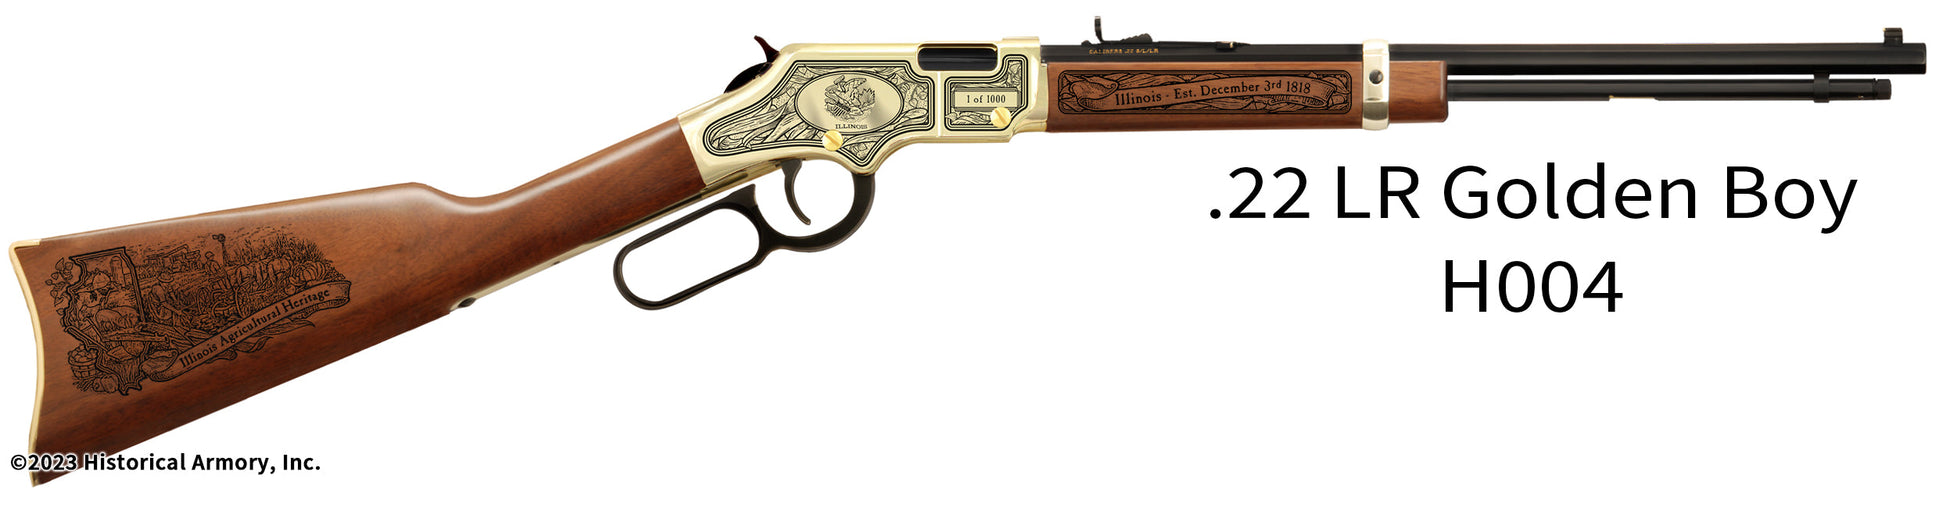 Illinois Agricultural Heritage Engraved Henry Golden Boy Rifle